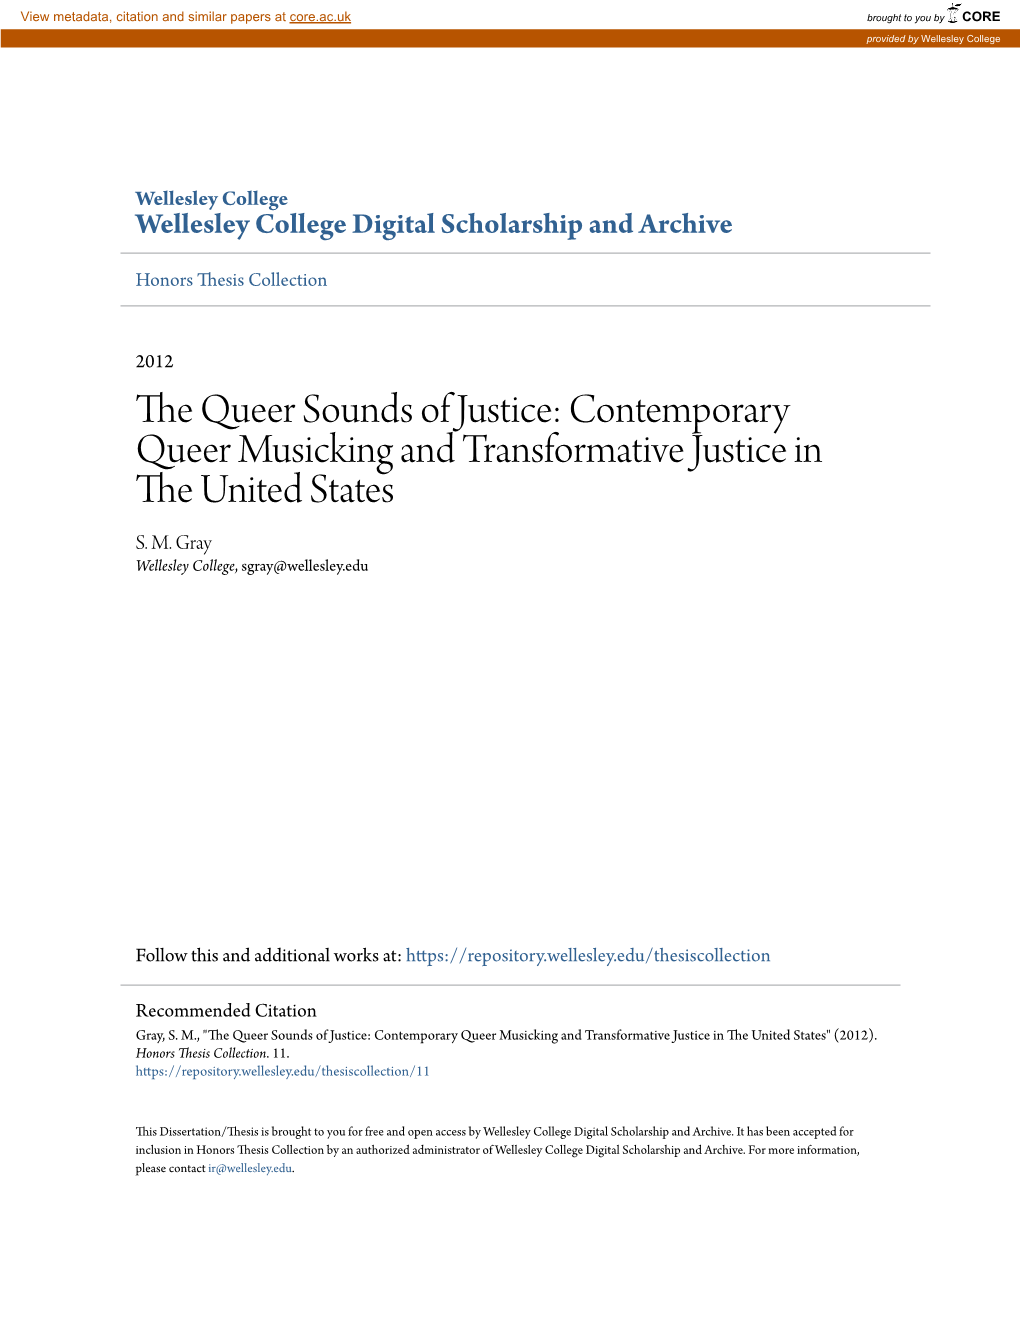 Contemporary Queer Musicking and Transformative Justice in the United States